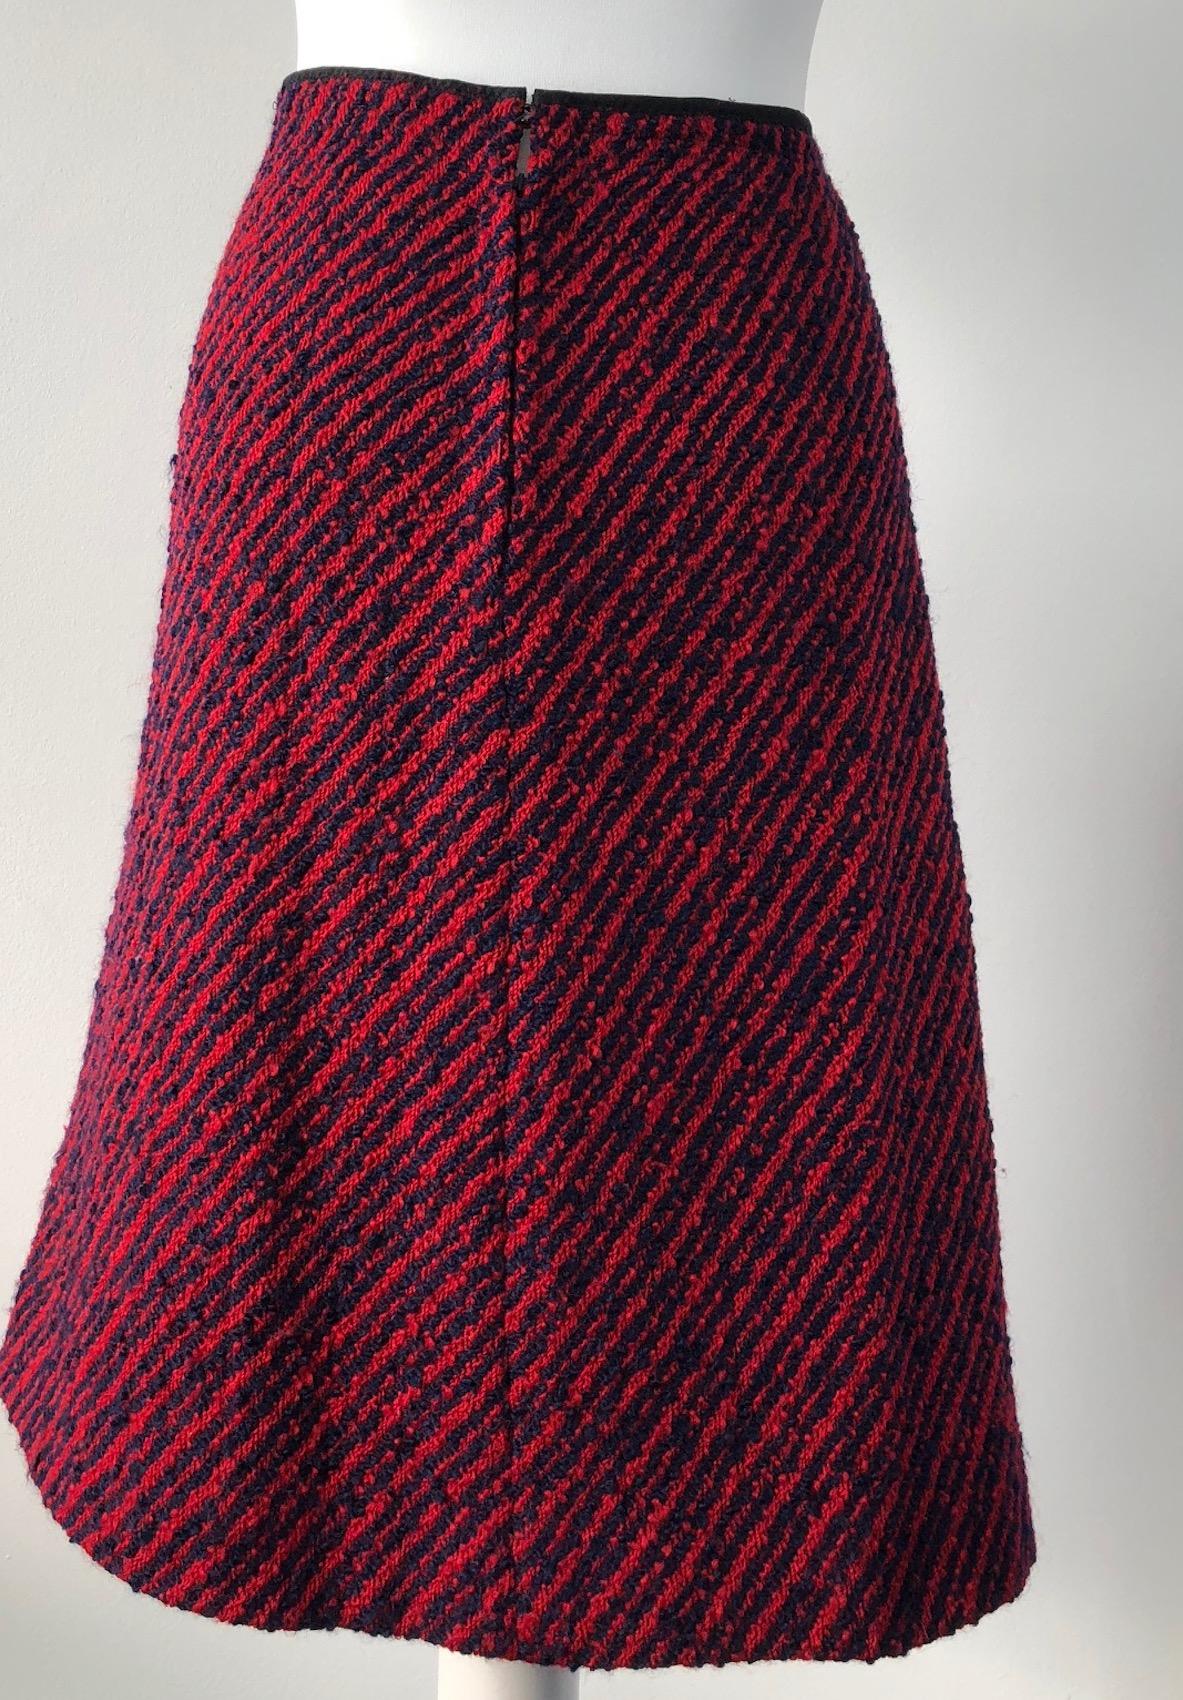 CHANEL Couture Tweed Pencil Skirt Vintage Red Midnight blue In Excellent Condition For Sale In London, GB